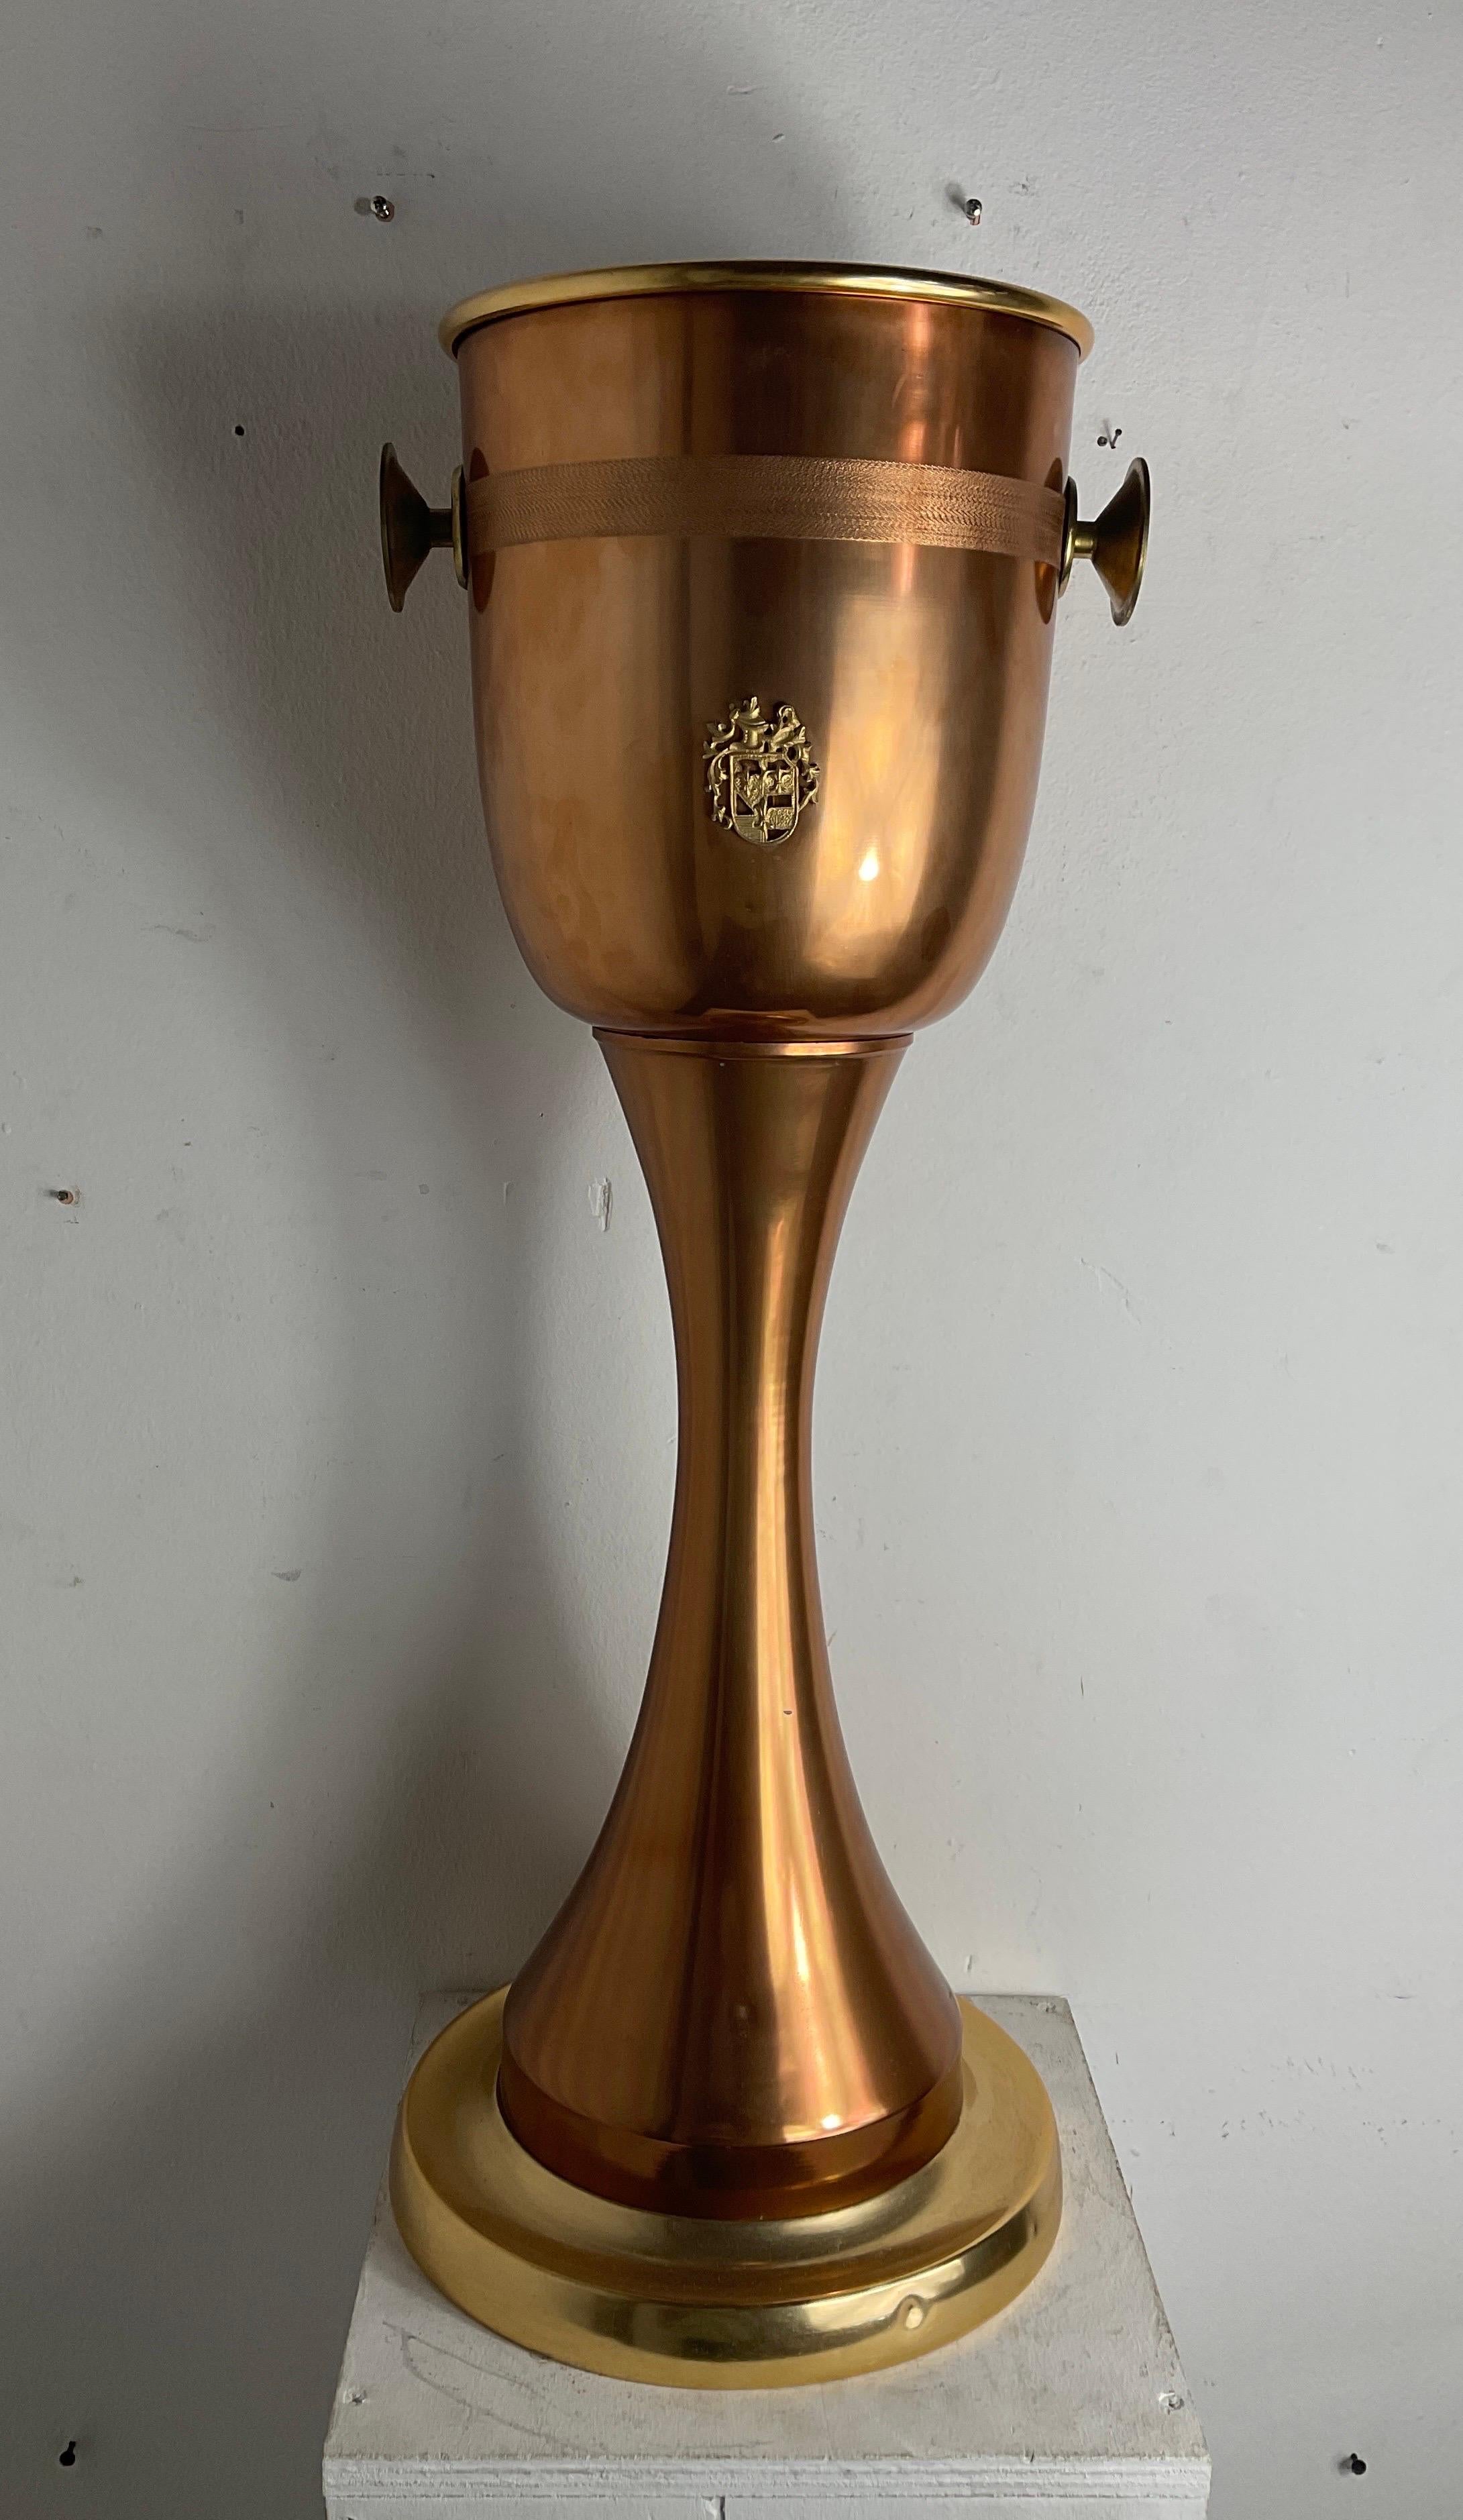 Copper bottle racks from the 80s. With a coat of arms in the centre of it, two side brass handles and in good condition with small wear and tear caused by years and use